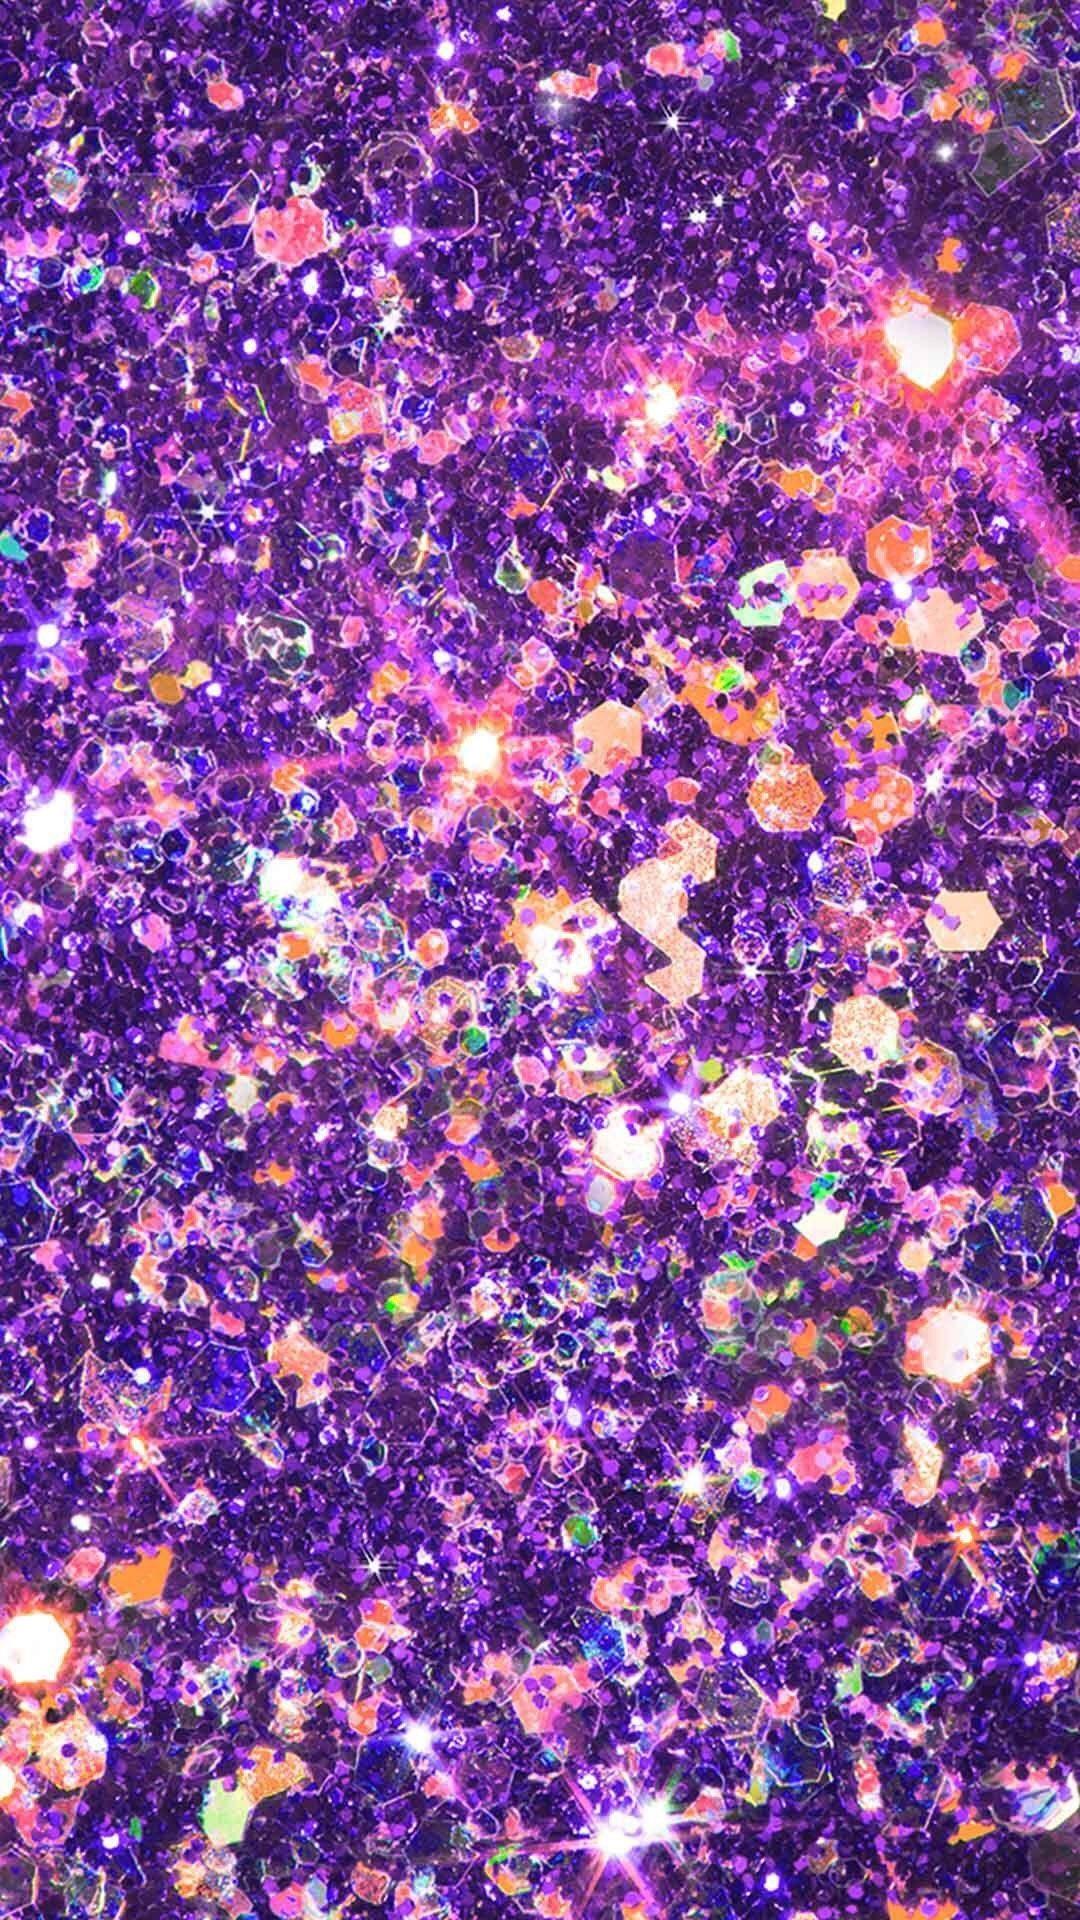 500 Glitter Phone Wallpapers  Background Beautiful Best Available For  Download Glitter Phone Images Free On Zicxacomphotos  Zicxa Photos